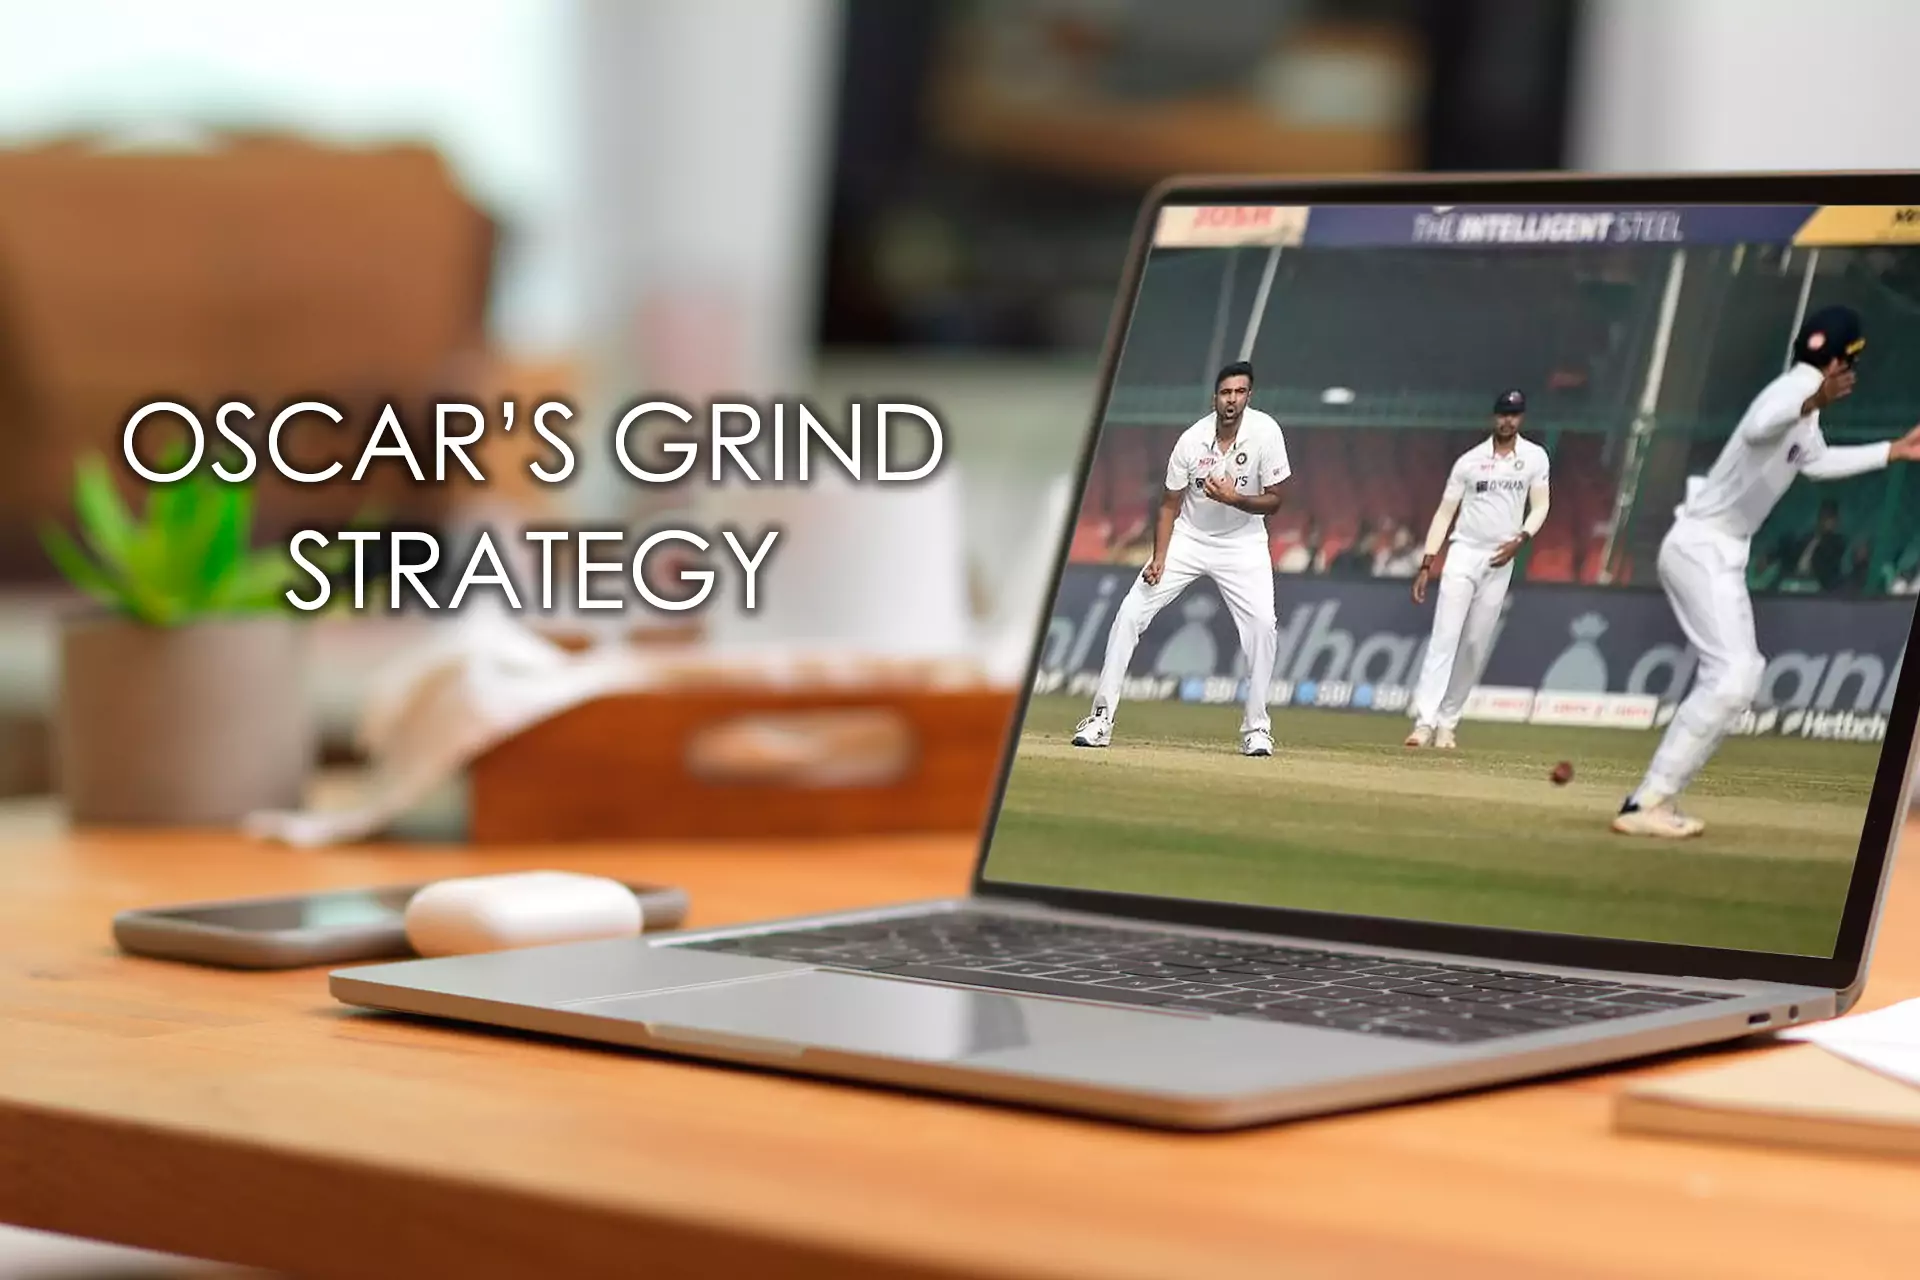 The Oscar's Grind is a variation of the Martingale strategy that is also often used for placing bets on cricket.